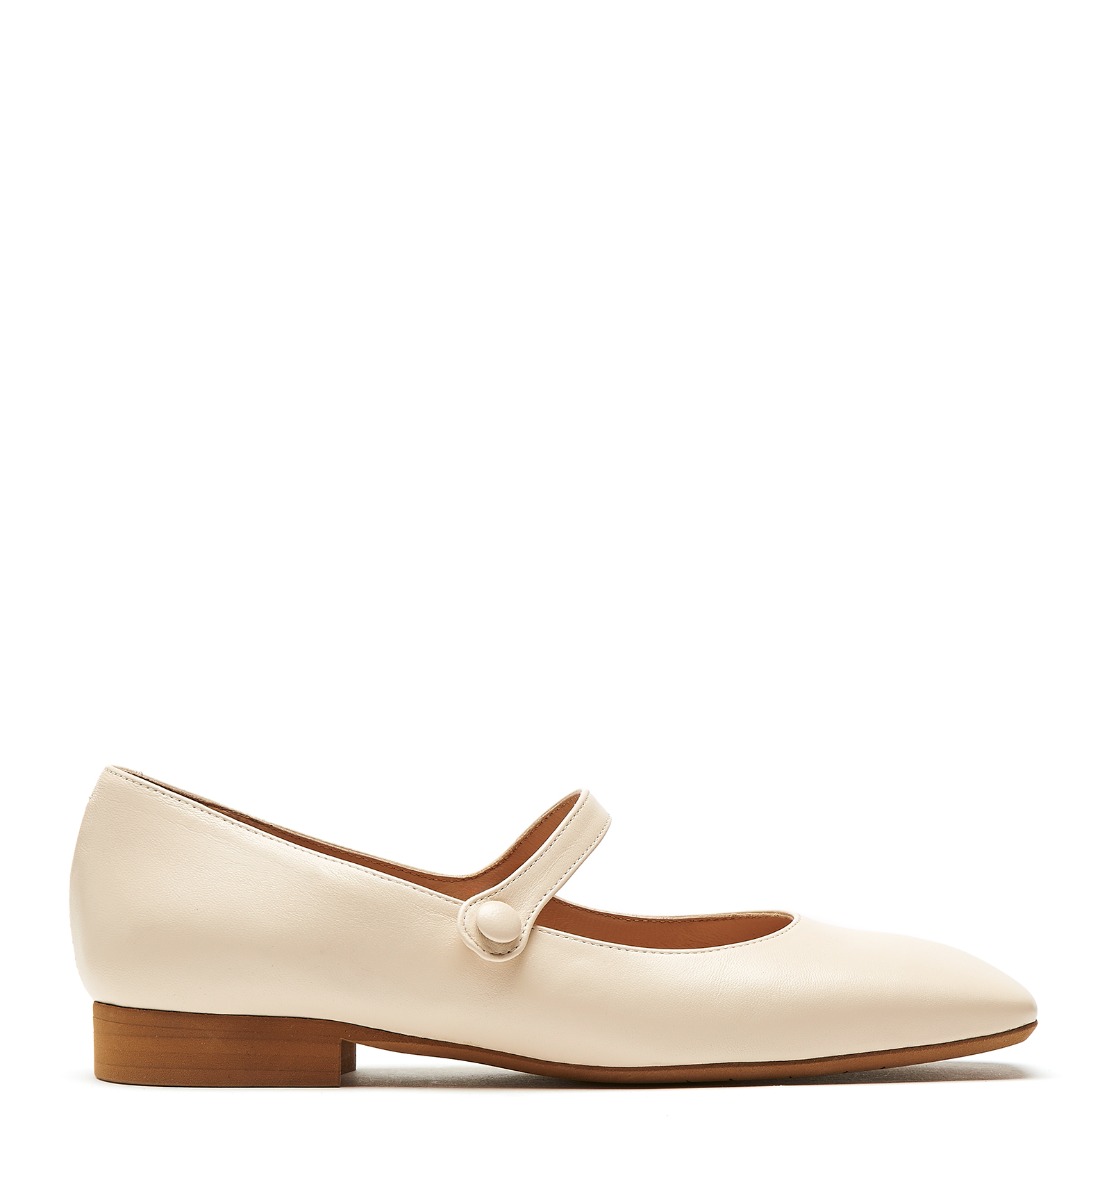 La Canadienne Rode Mary Jane Leather Flat In Butter